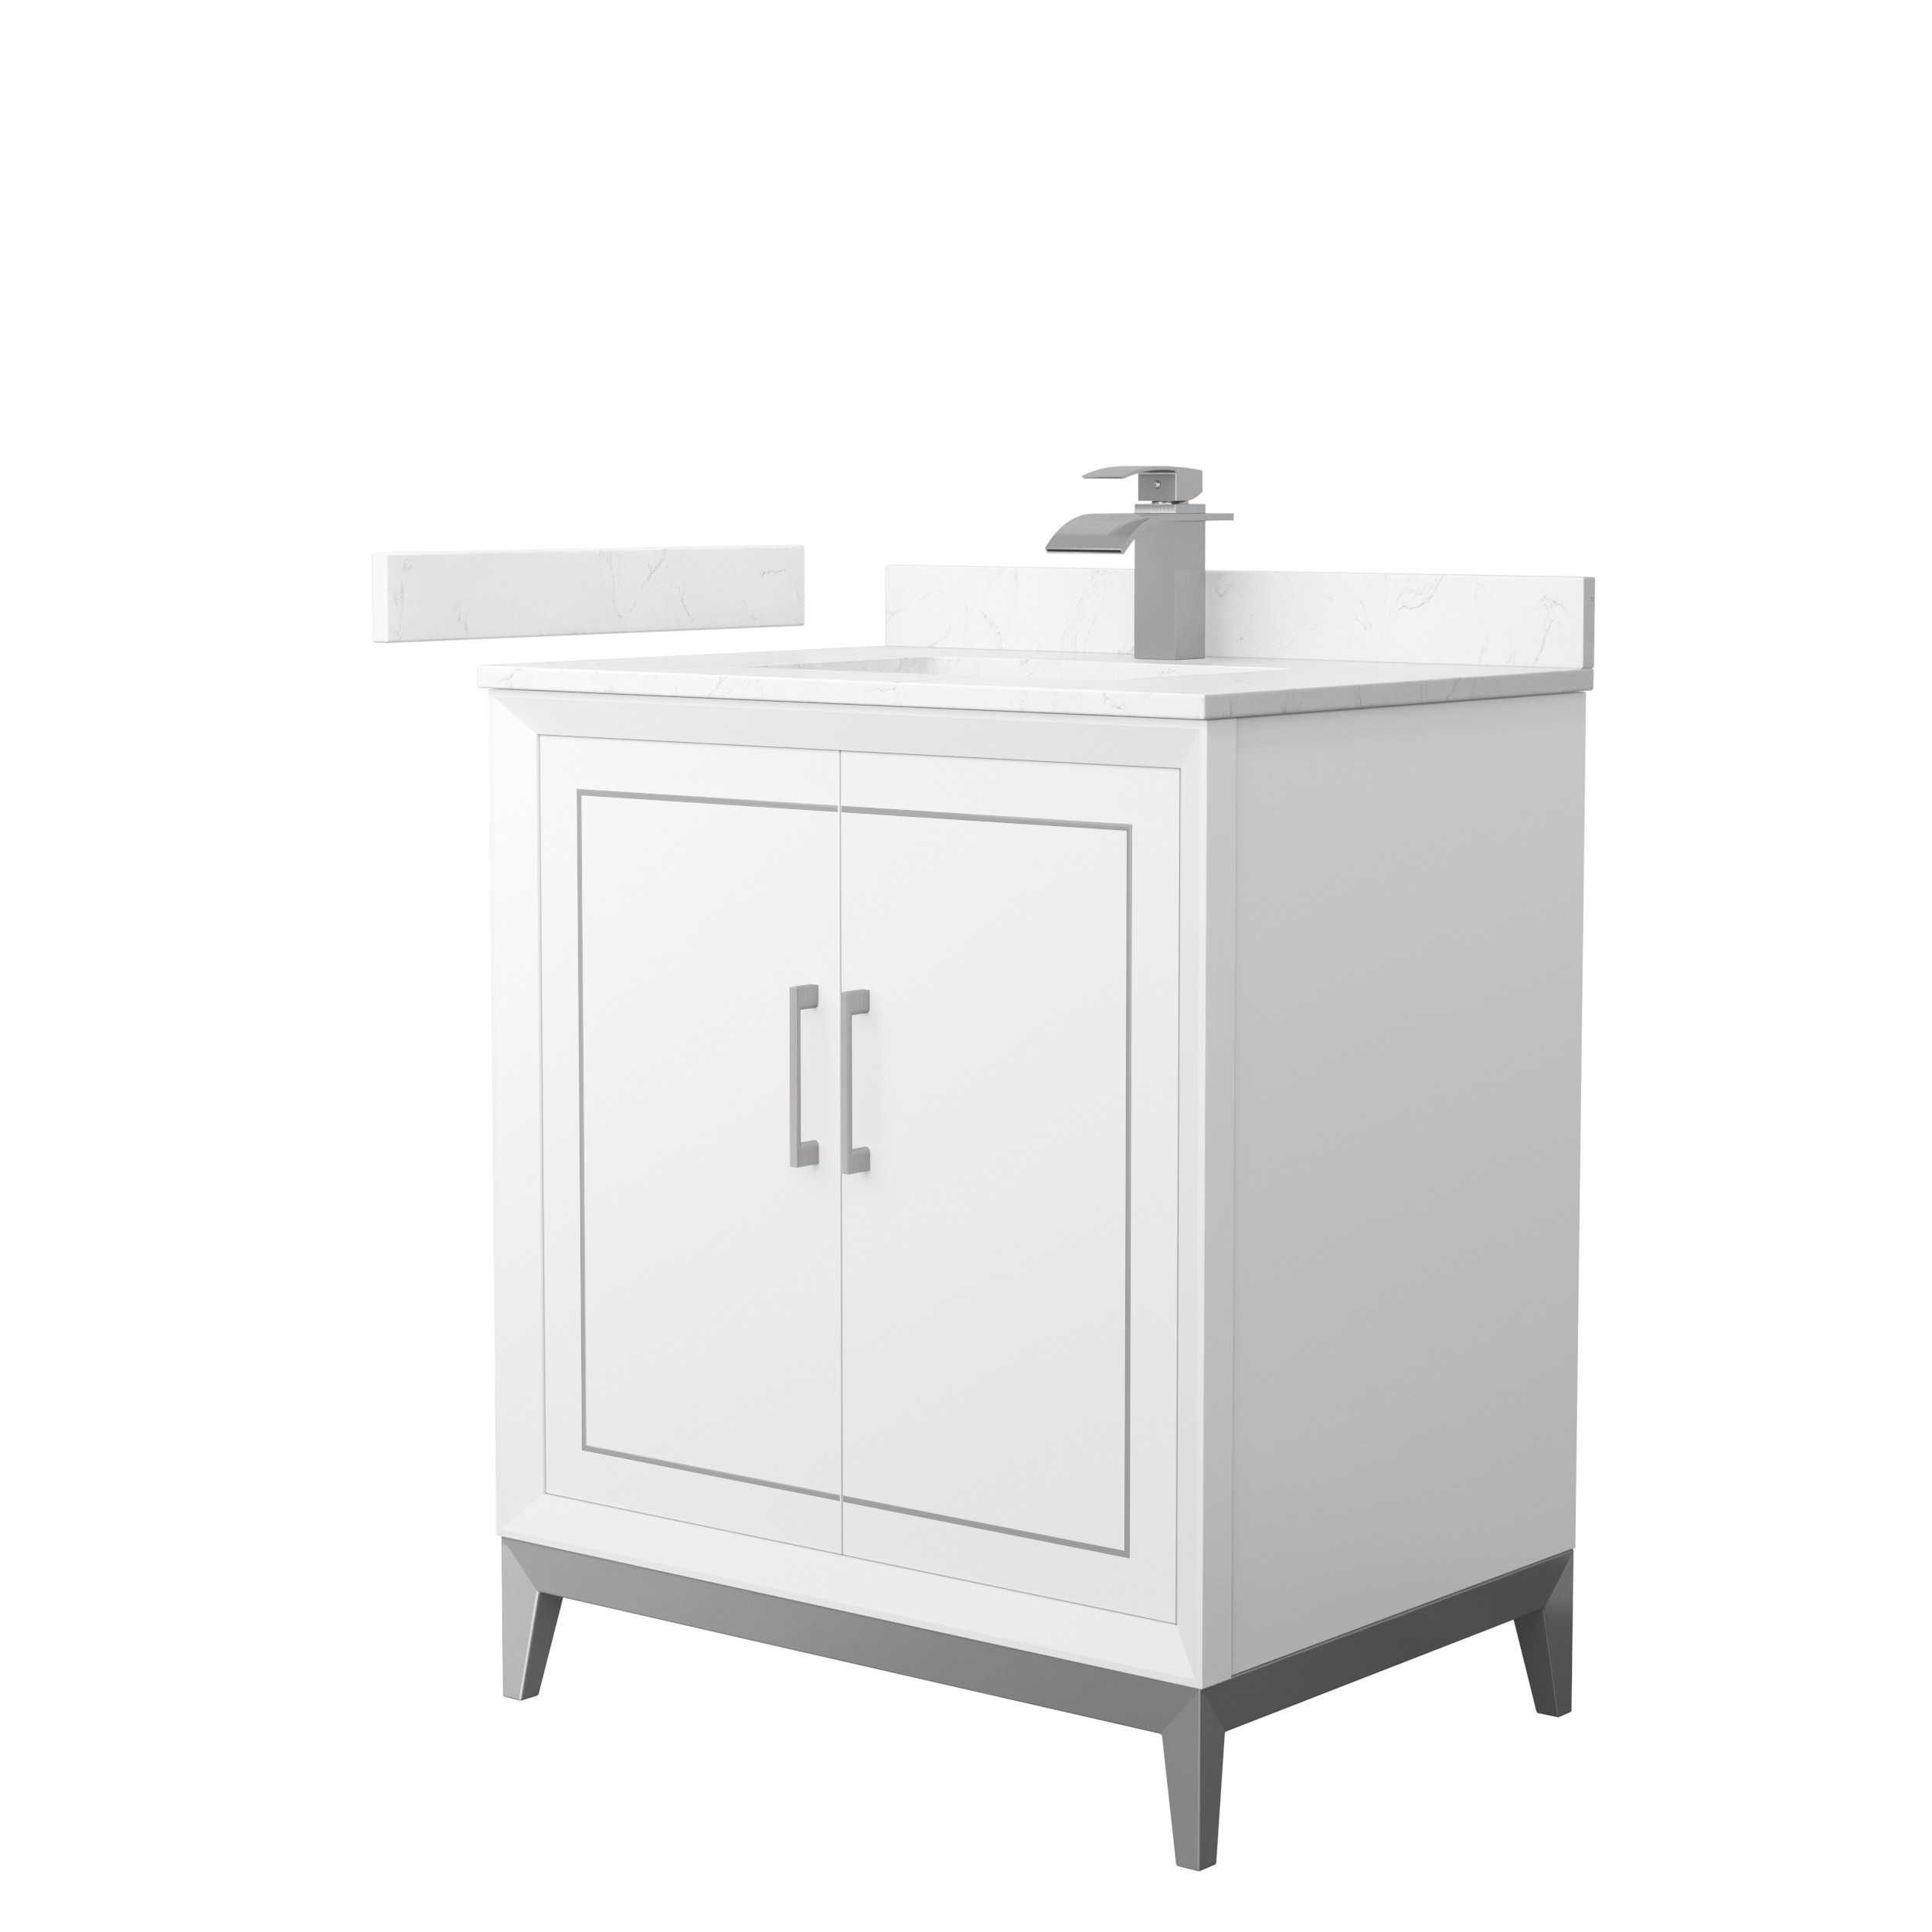 marlena 30" single vanity with optional cultured marble counter - white